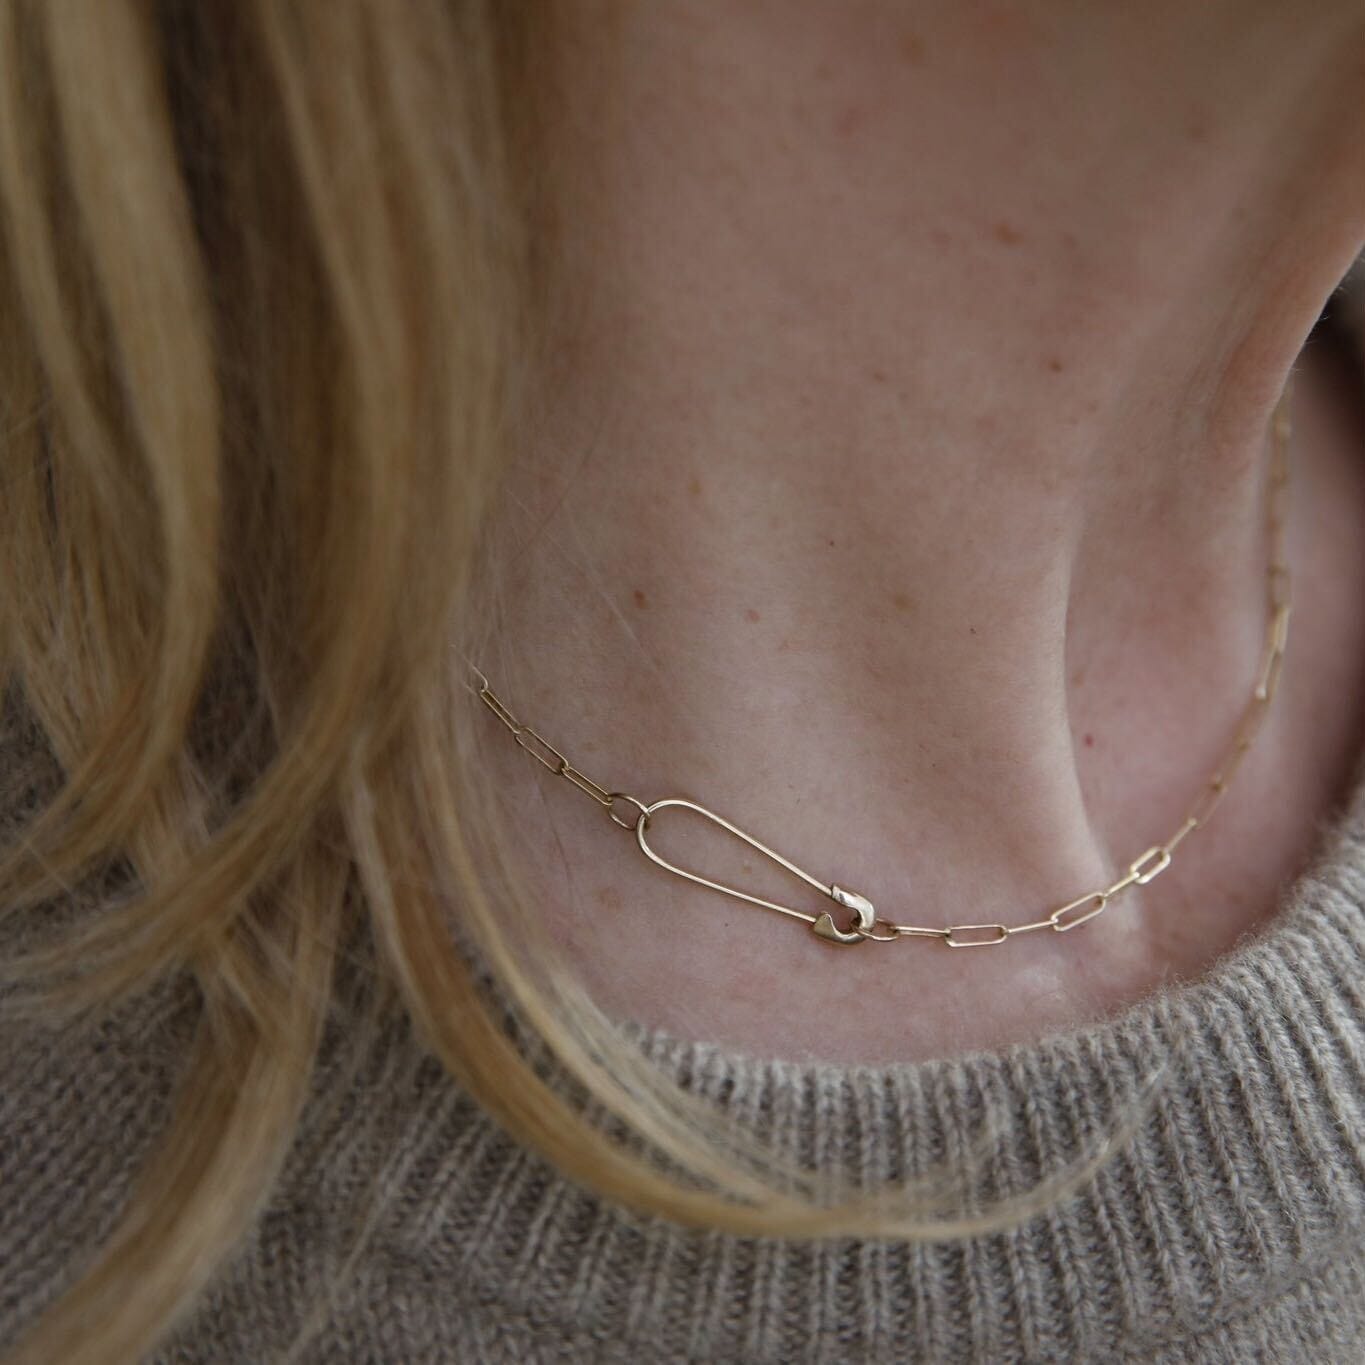 Hortense Jewelry Necklaces The Safety Pin Small Link Necklace in Yellow 14K Gold by Hortense